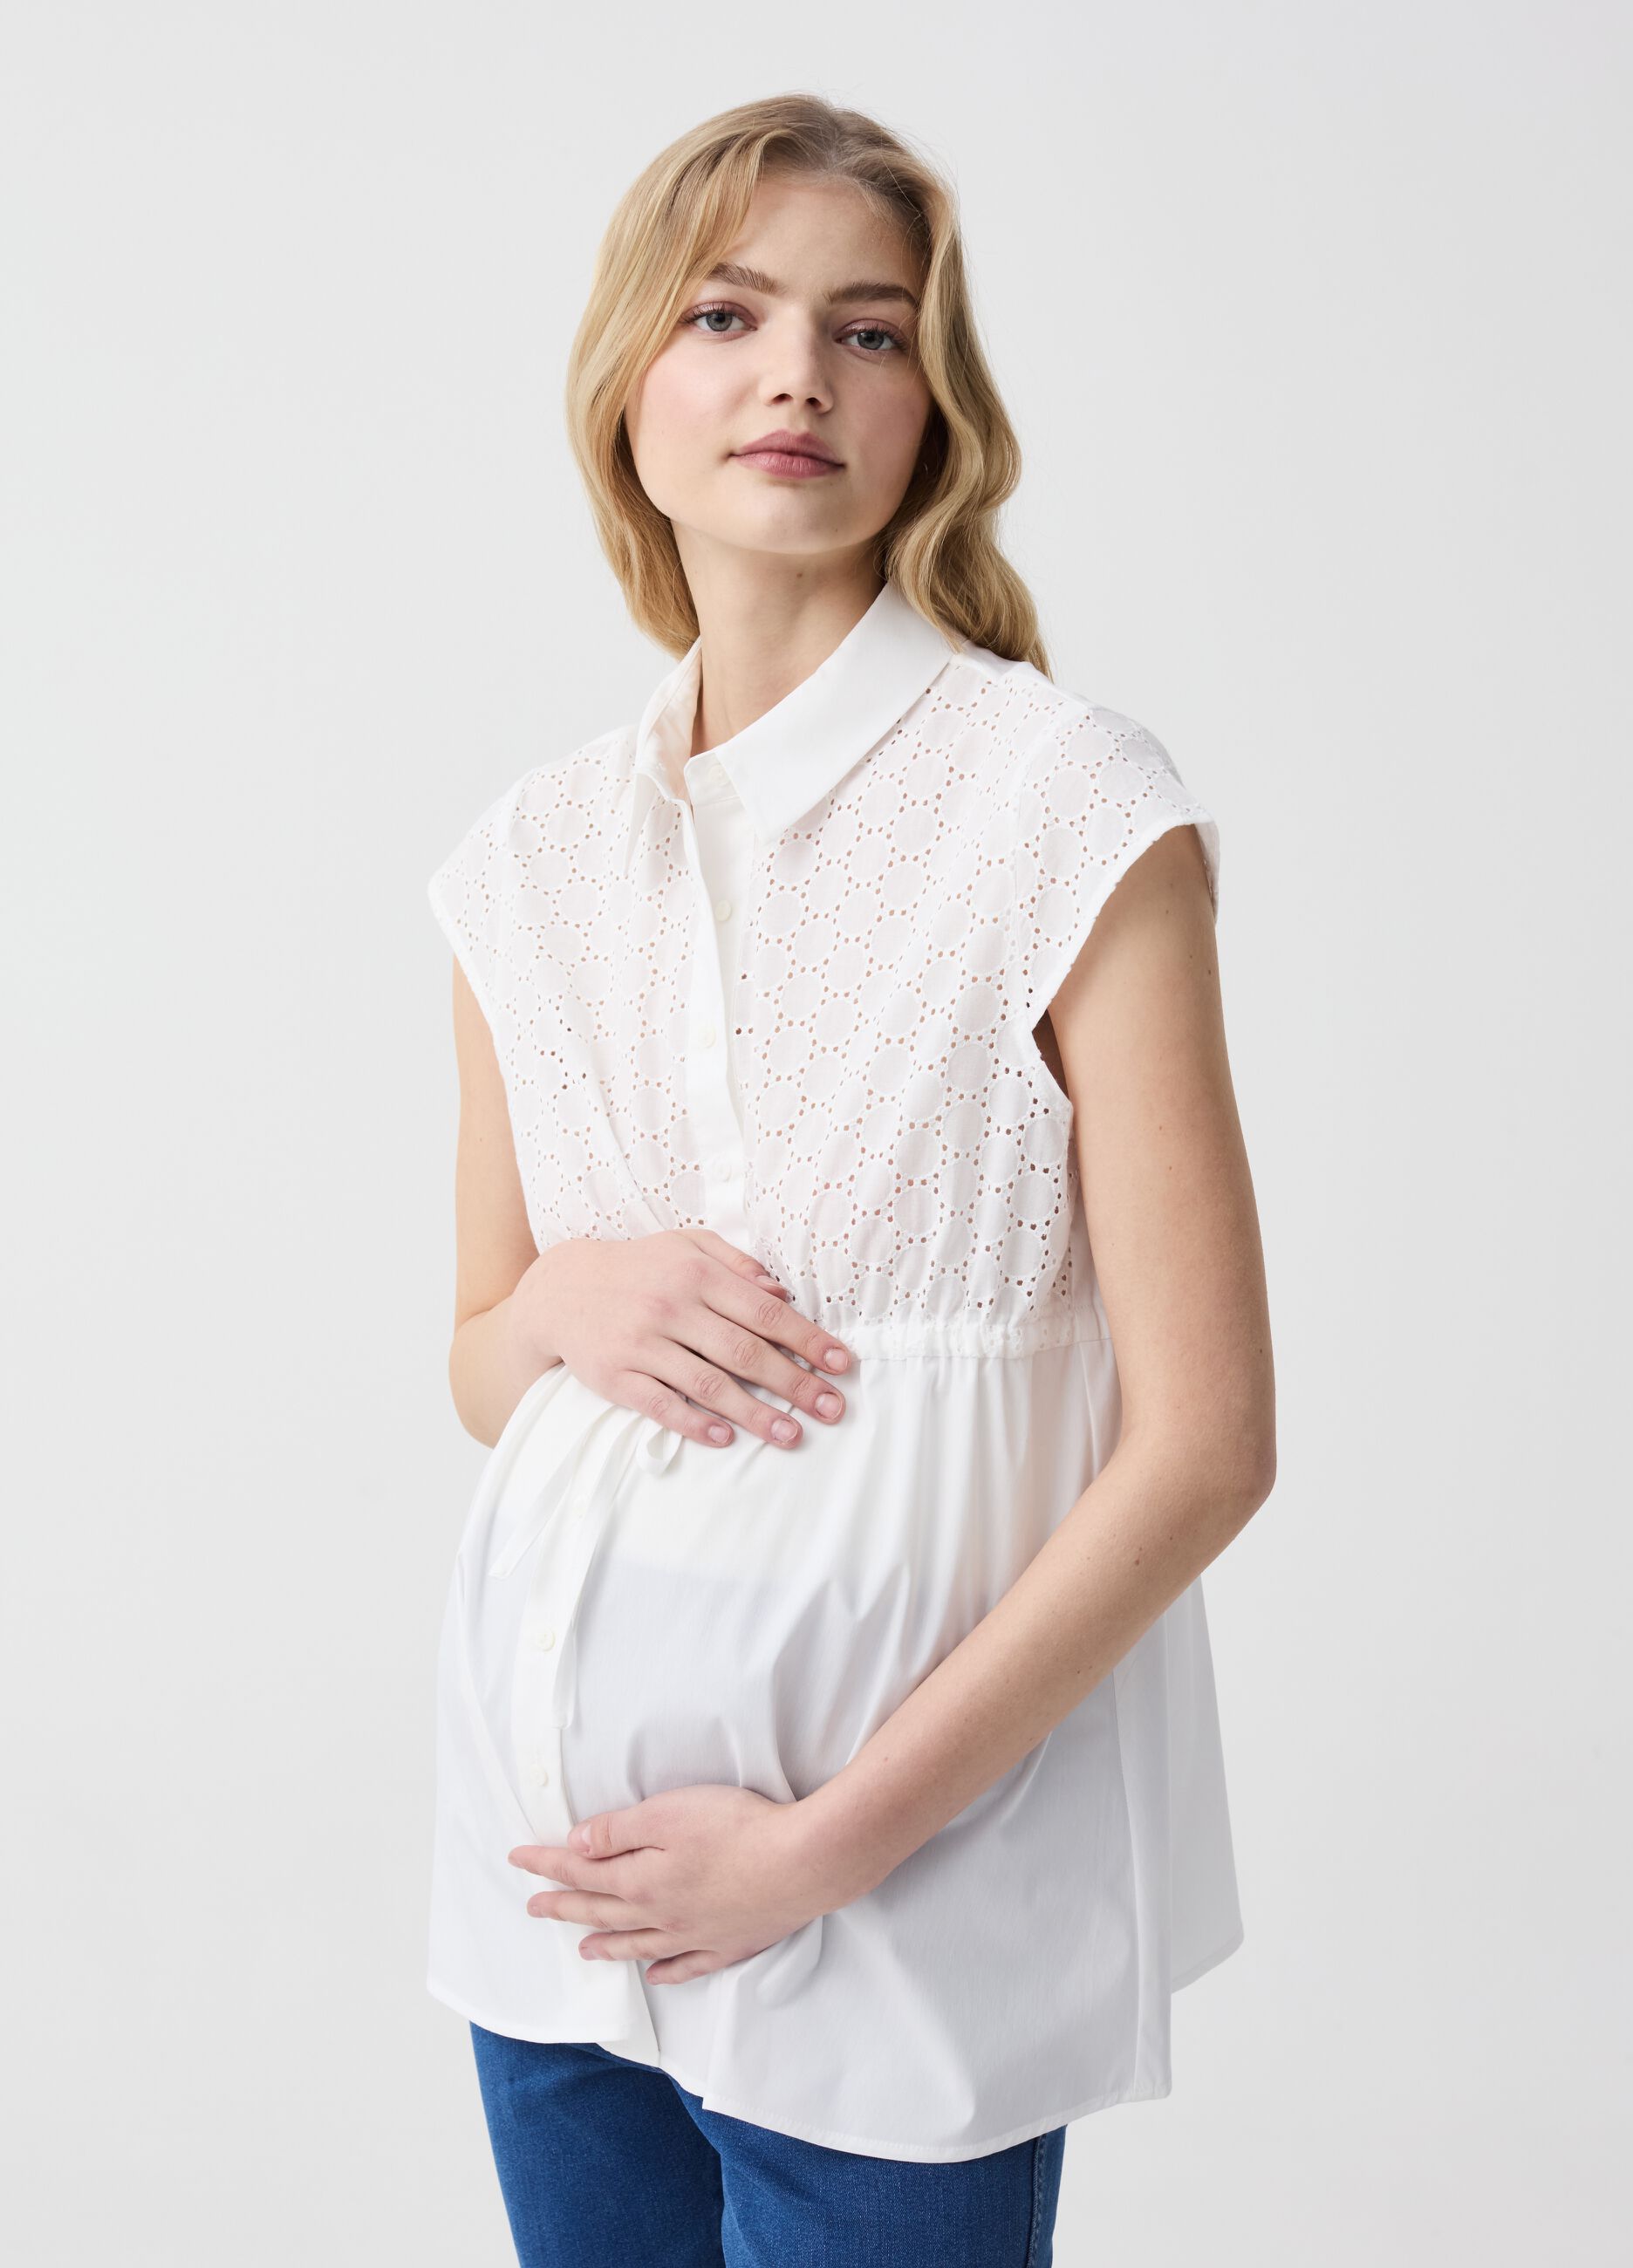 Maternity blouse with inserts